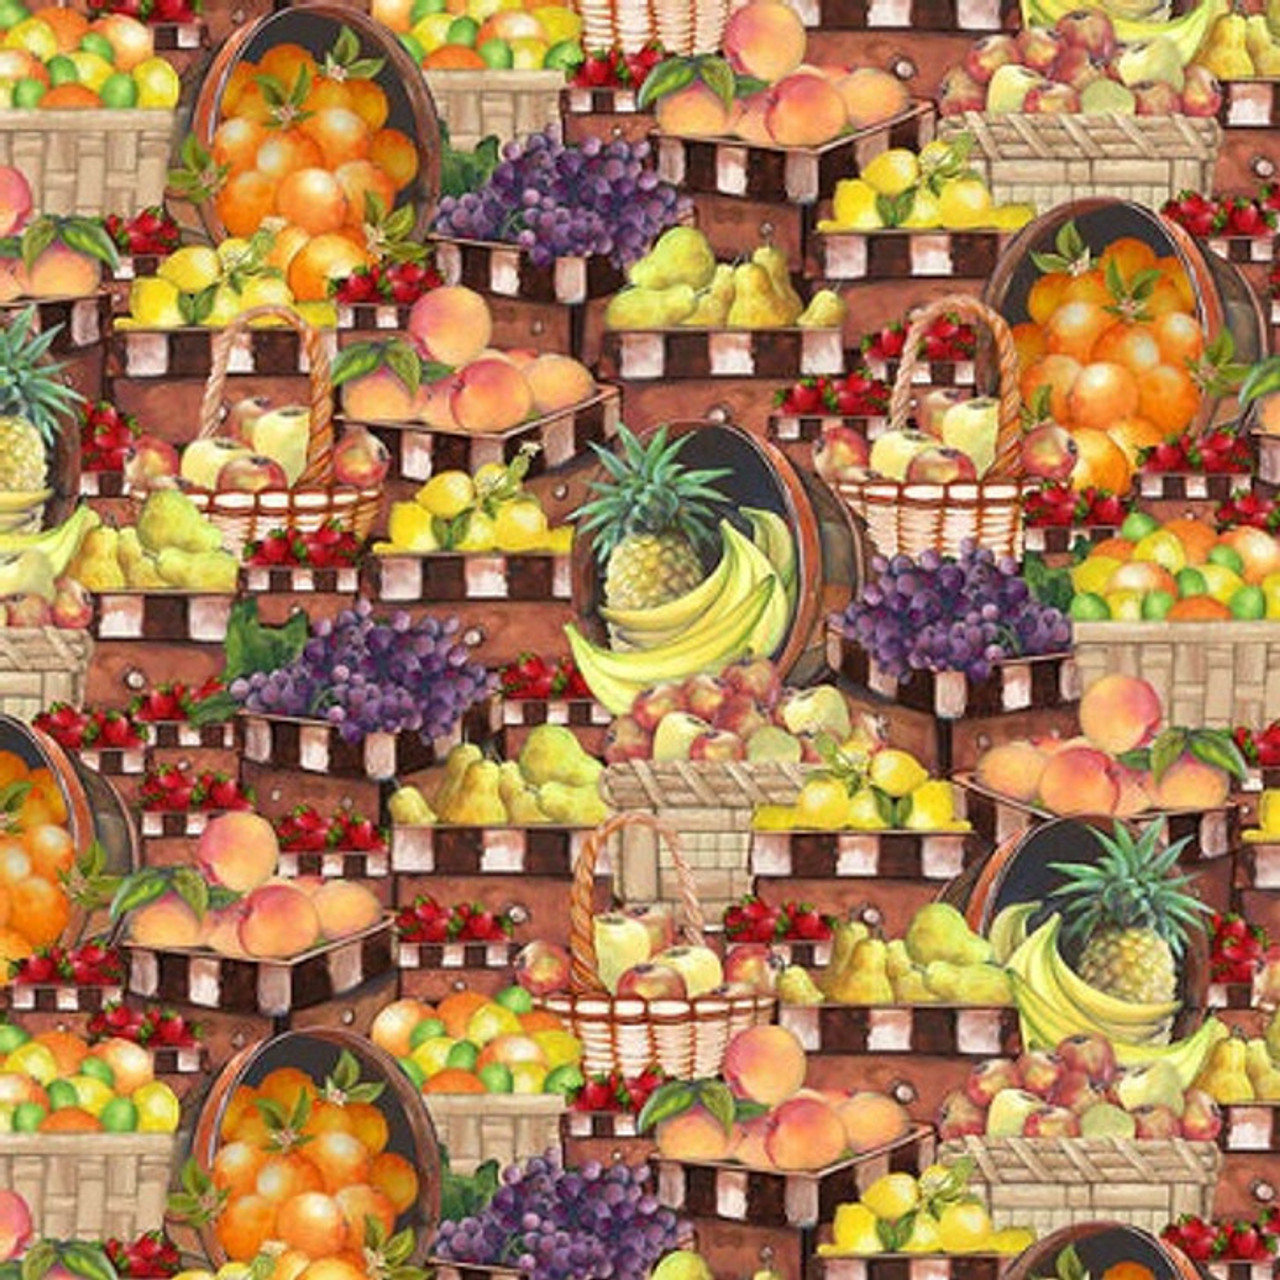 Blank Quilting Fruit For Thought Fruits In Baskets Brown Cotton Fabric By The Yard